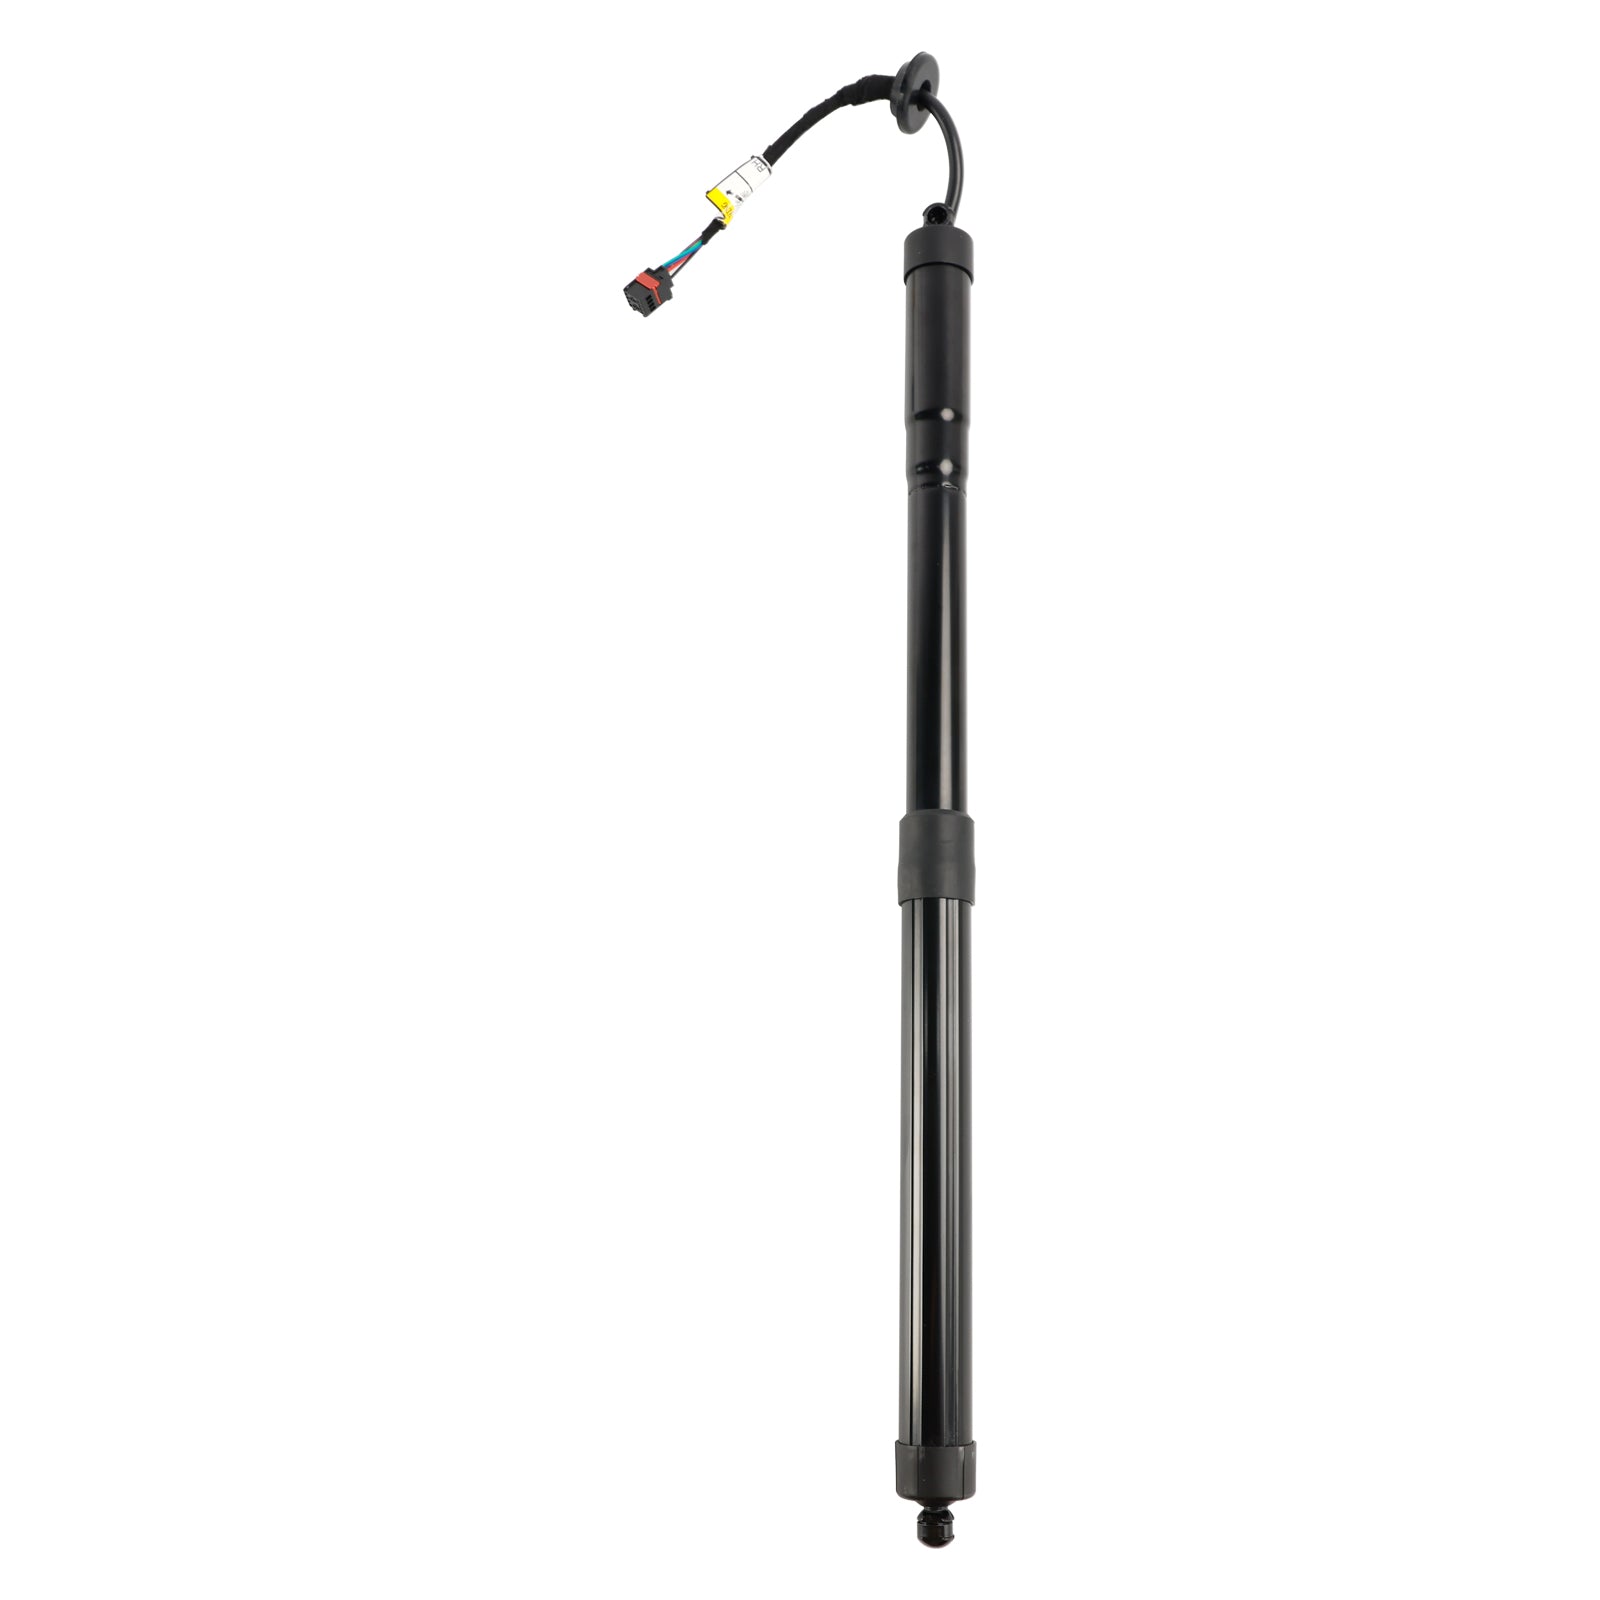 Rear Right Electric Tailgate Gas Strut 32296297 Pour Volvo XC40 536 2019-2023